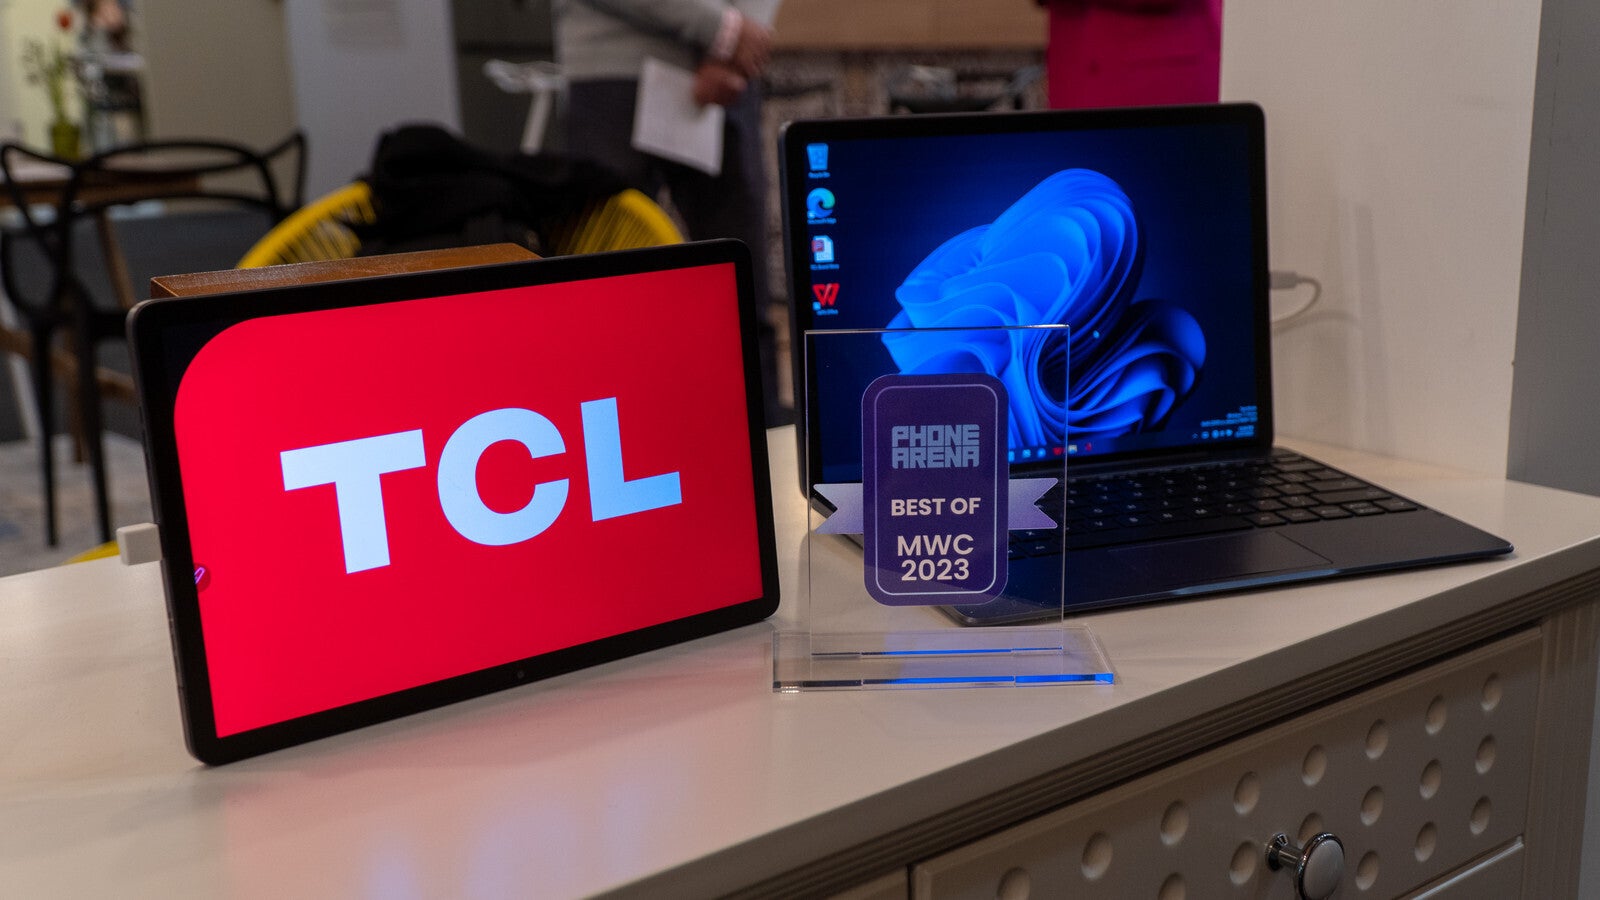 Best of MWC 2023: PhoneArena Awards